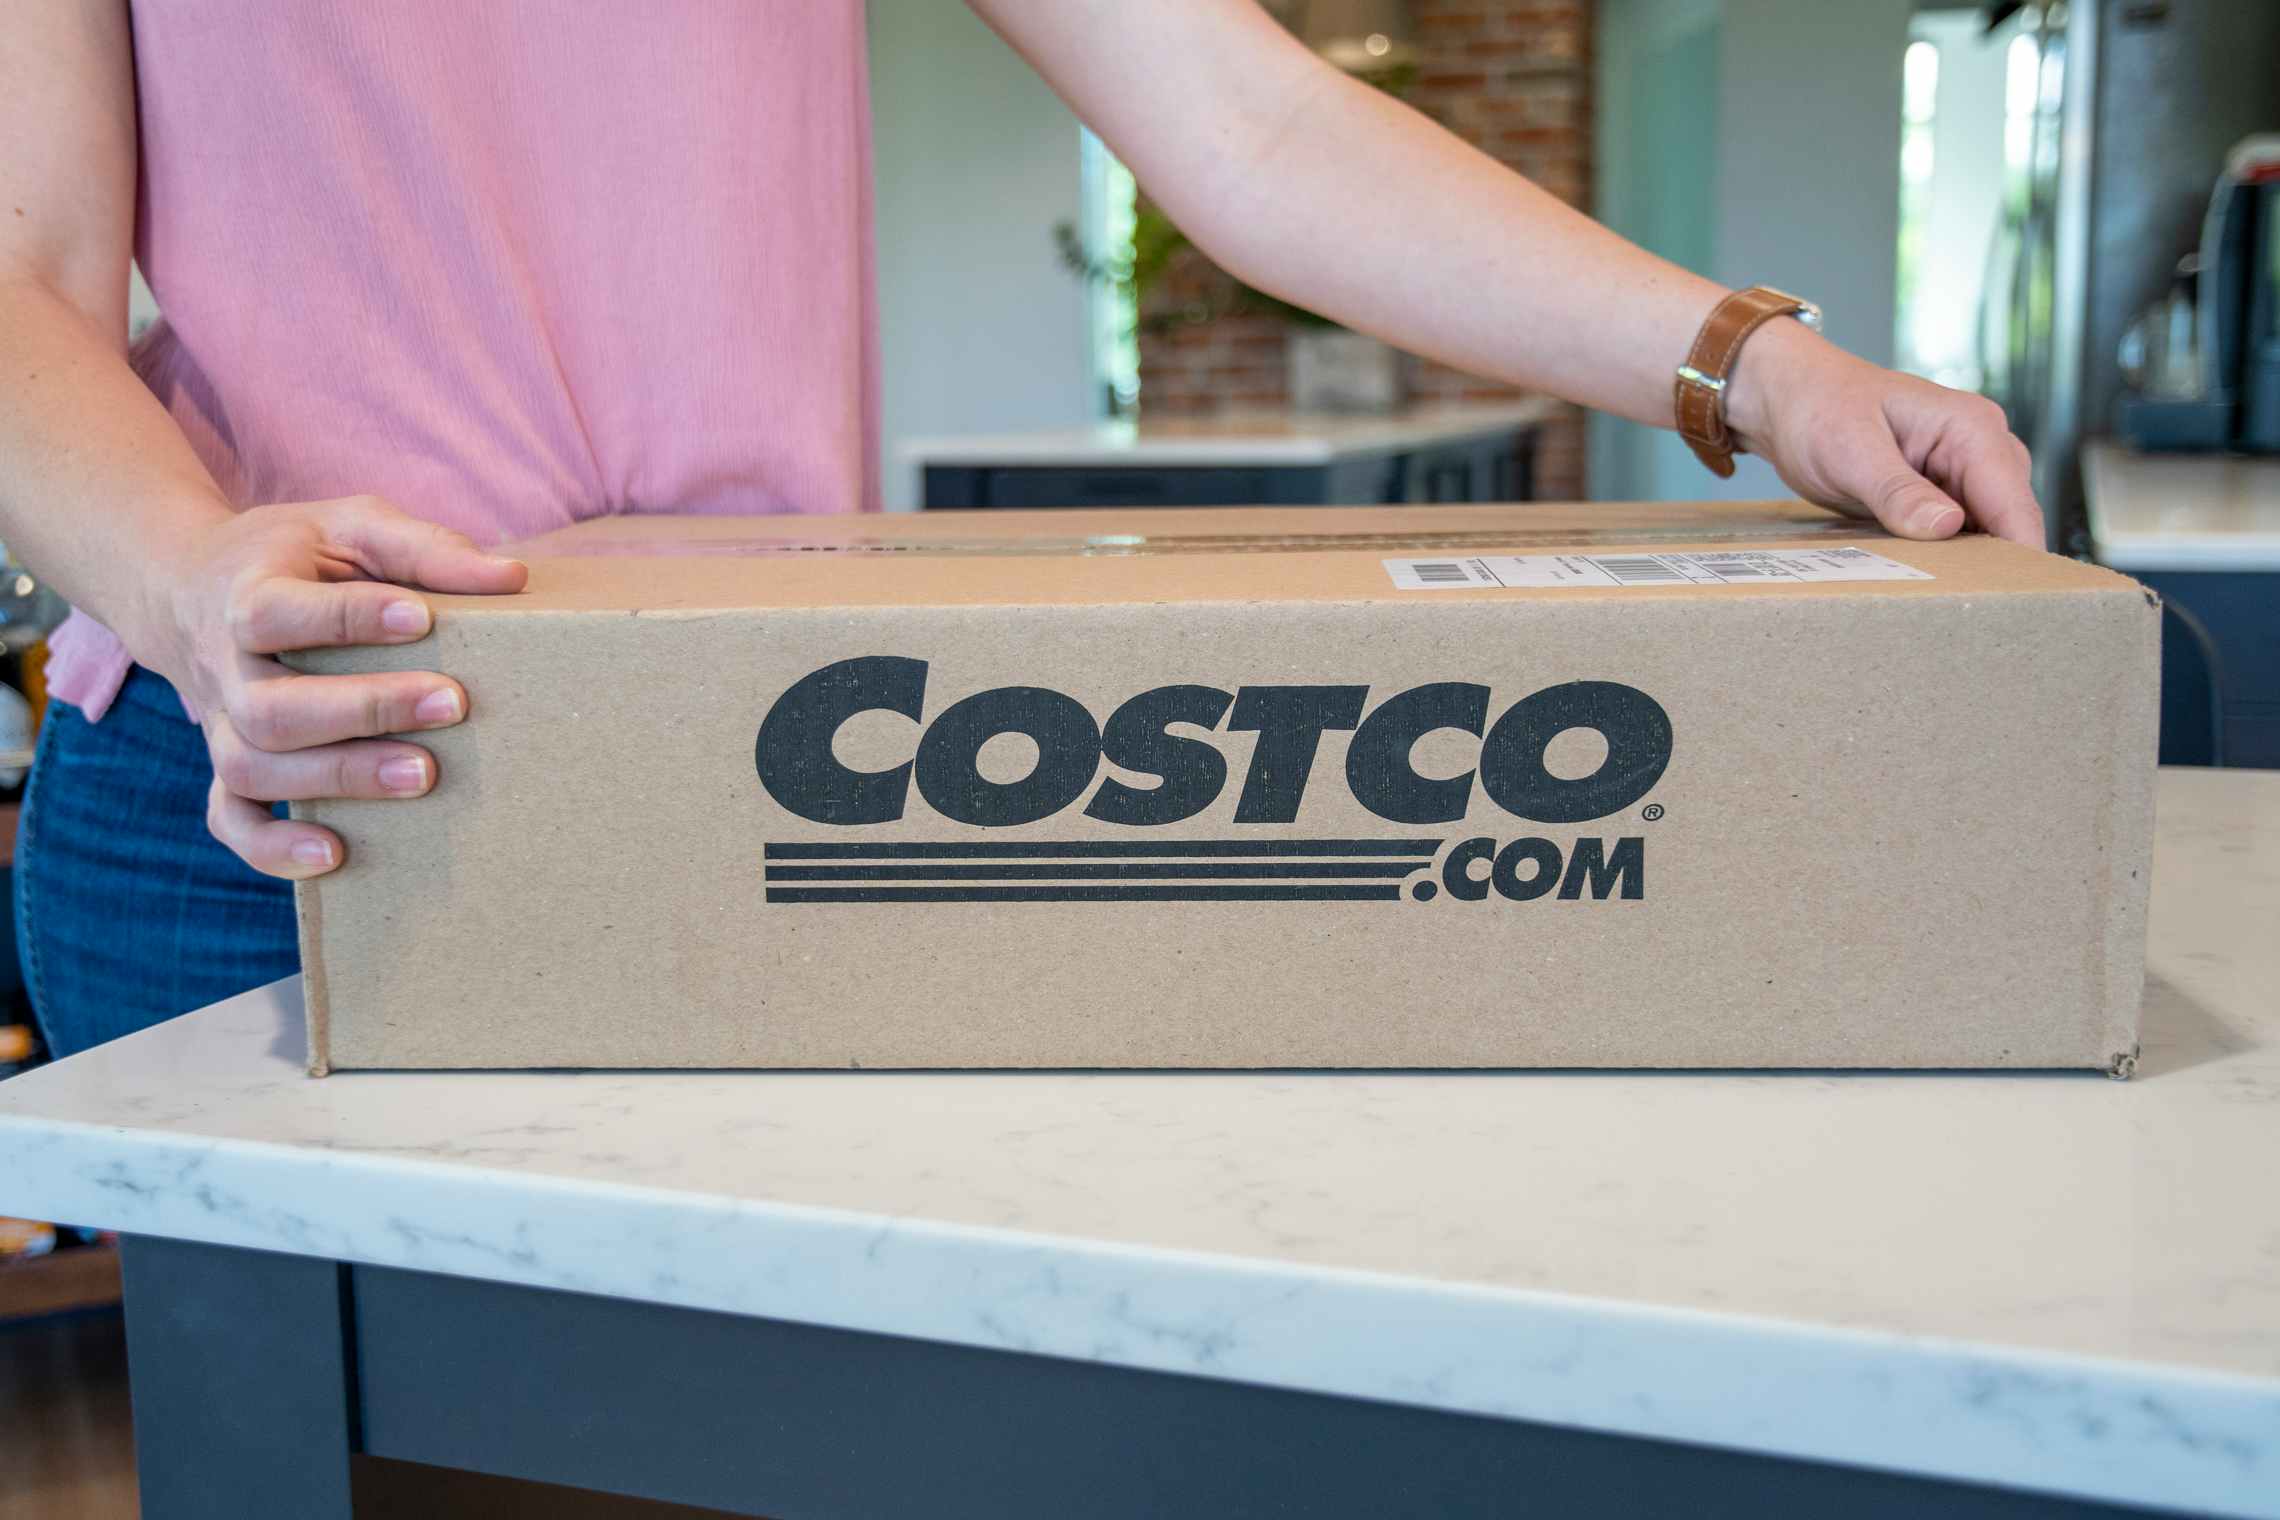 A person opening a Costco.com online order box.